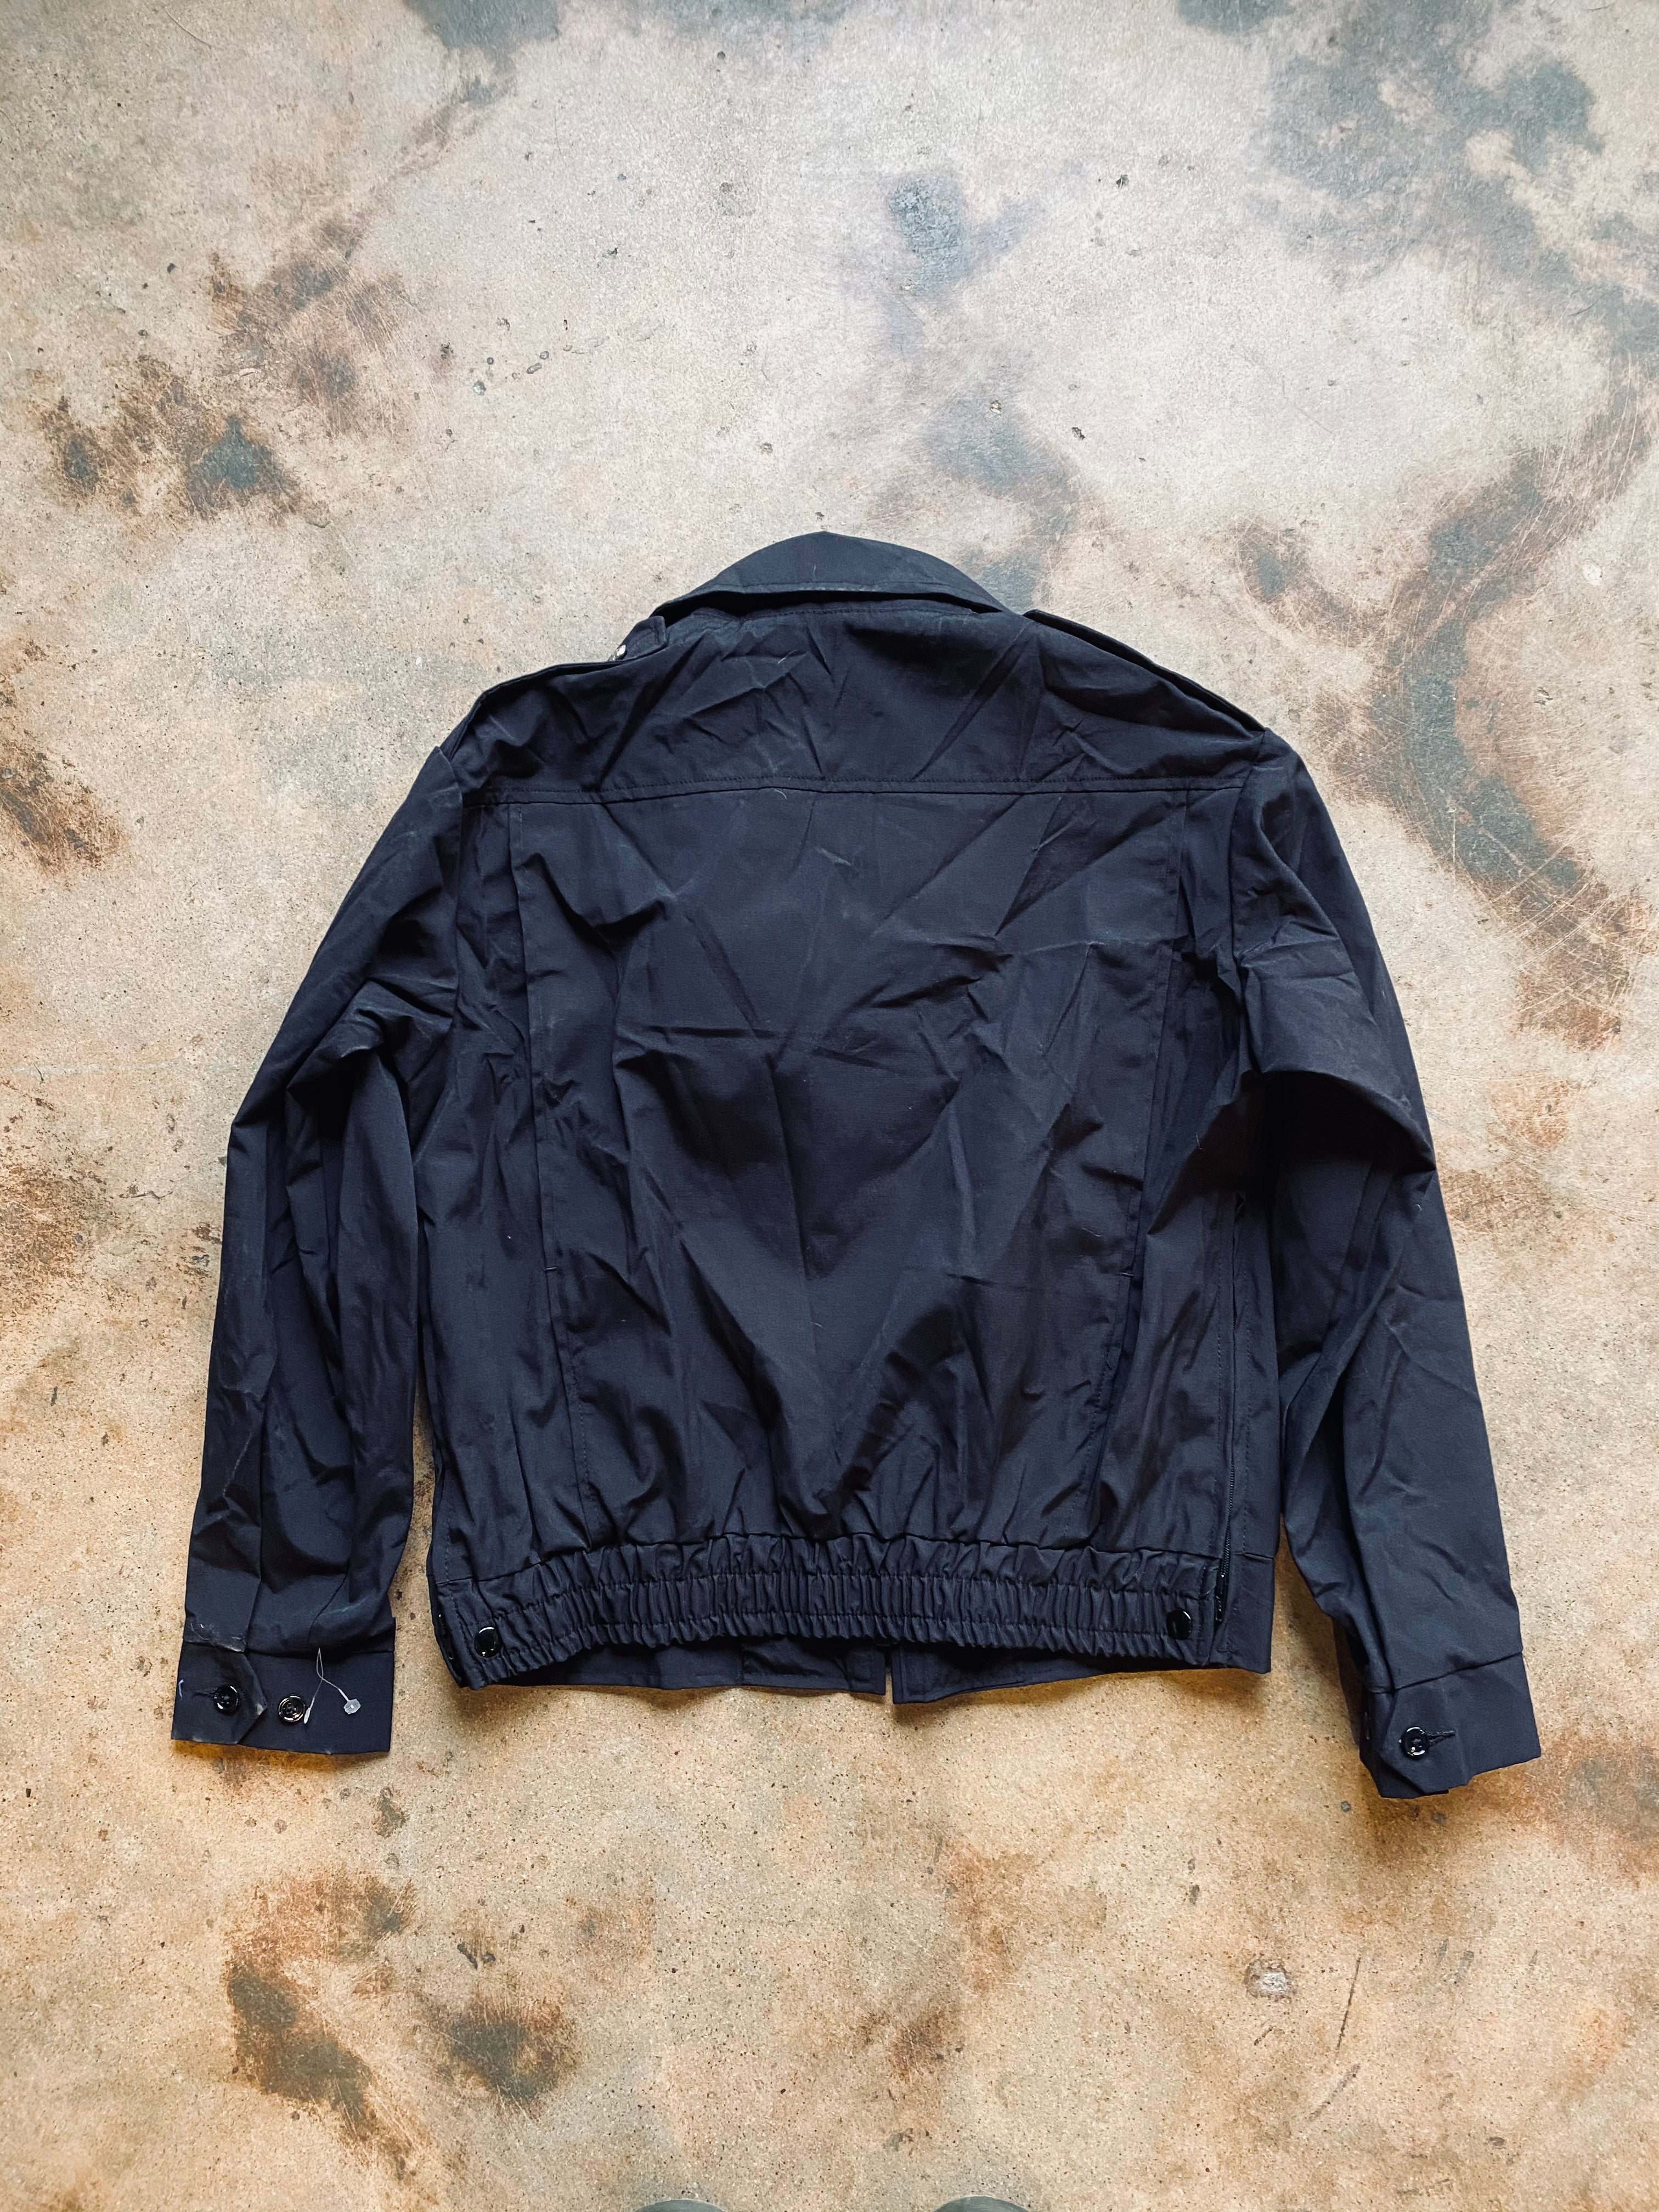 1997 Horace Small Apparel Co. Jacket | Small